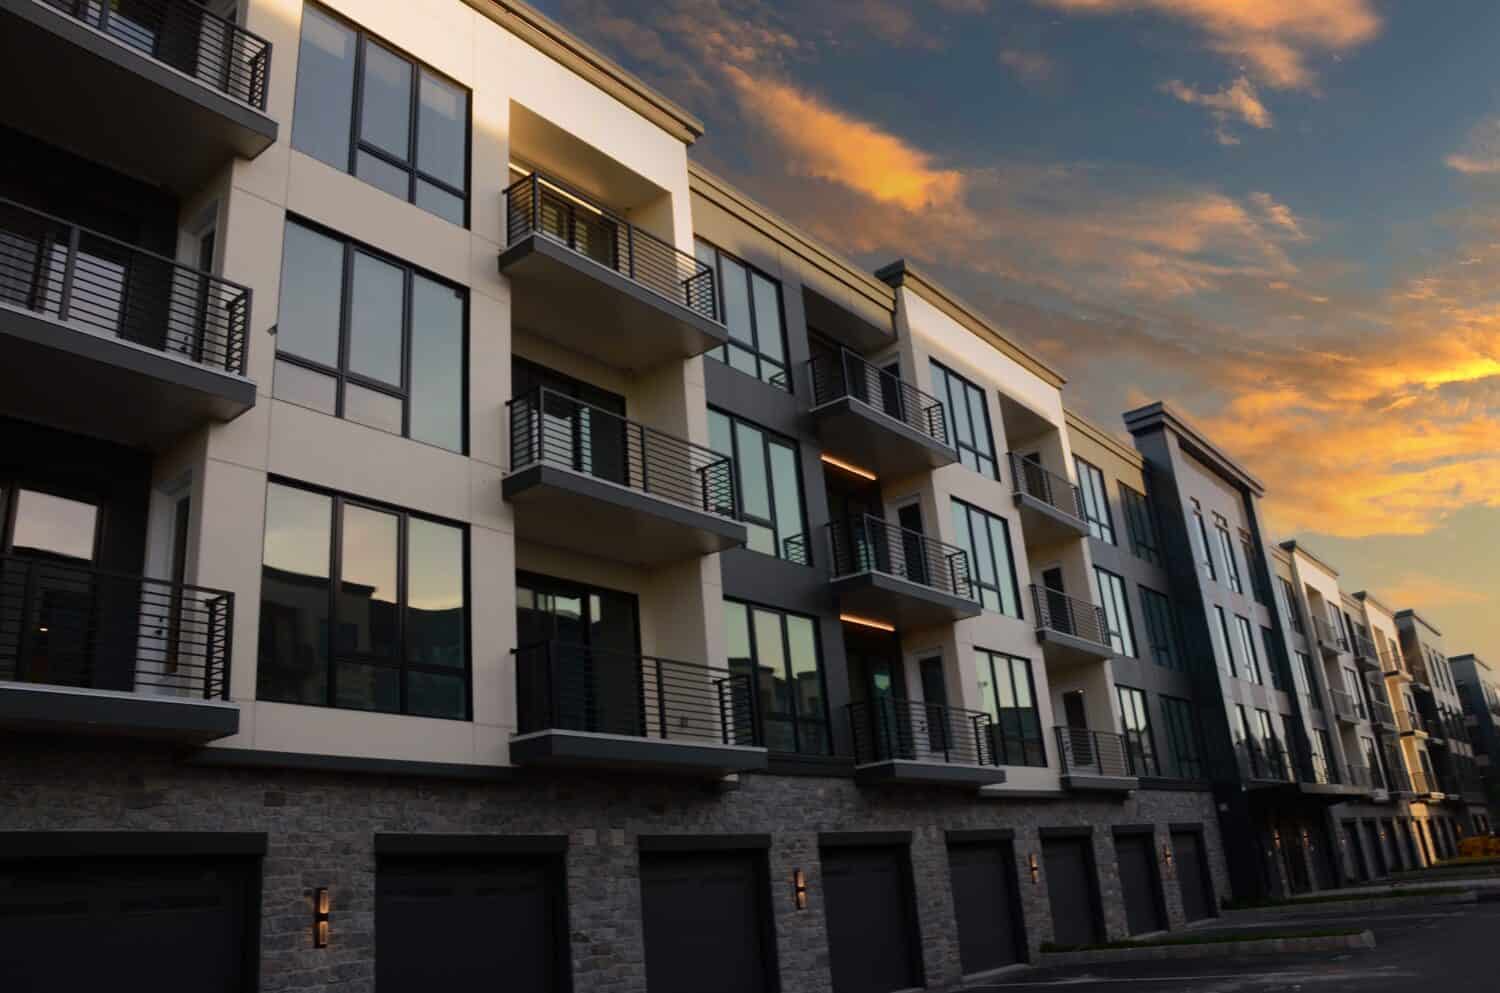 Newly constructed luxury apartment buildings with sophisticated design go up in the Woodbridge township area in New Jersey.